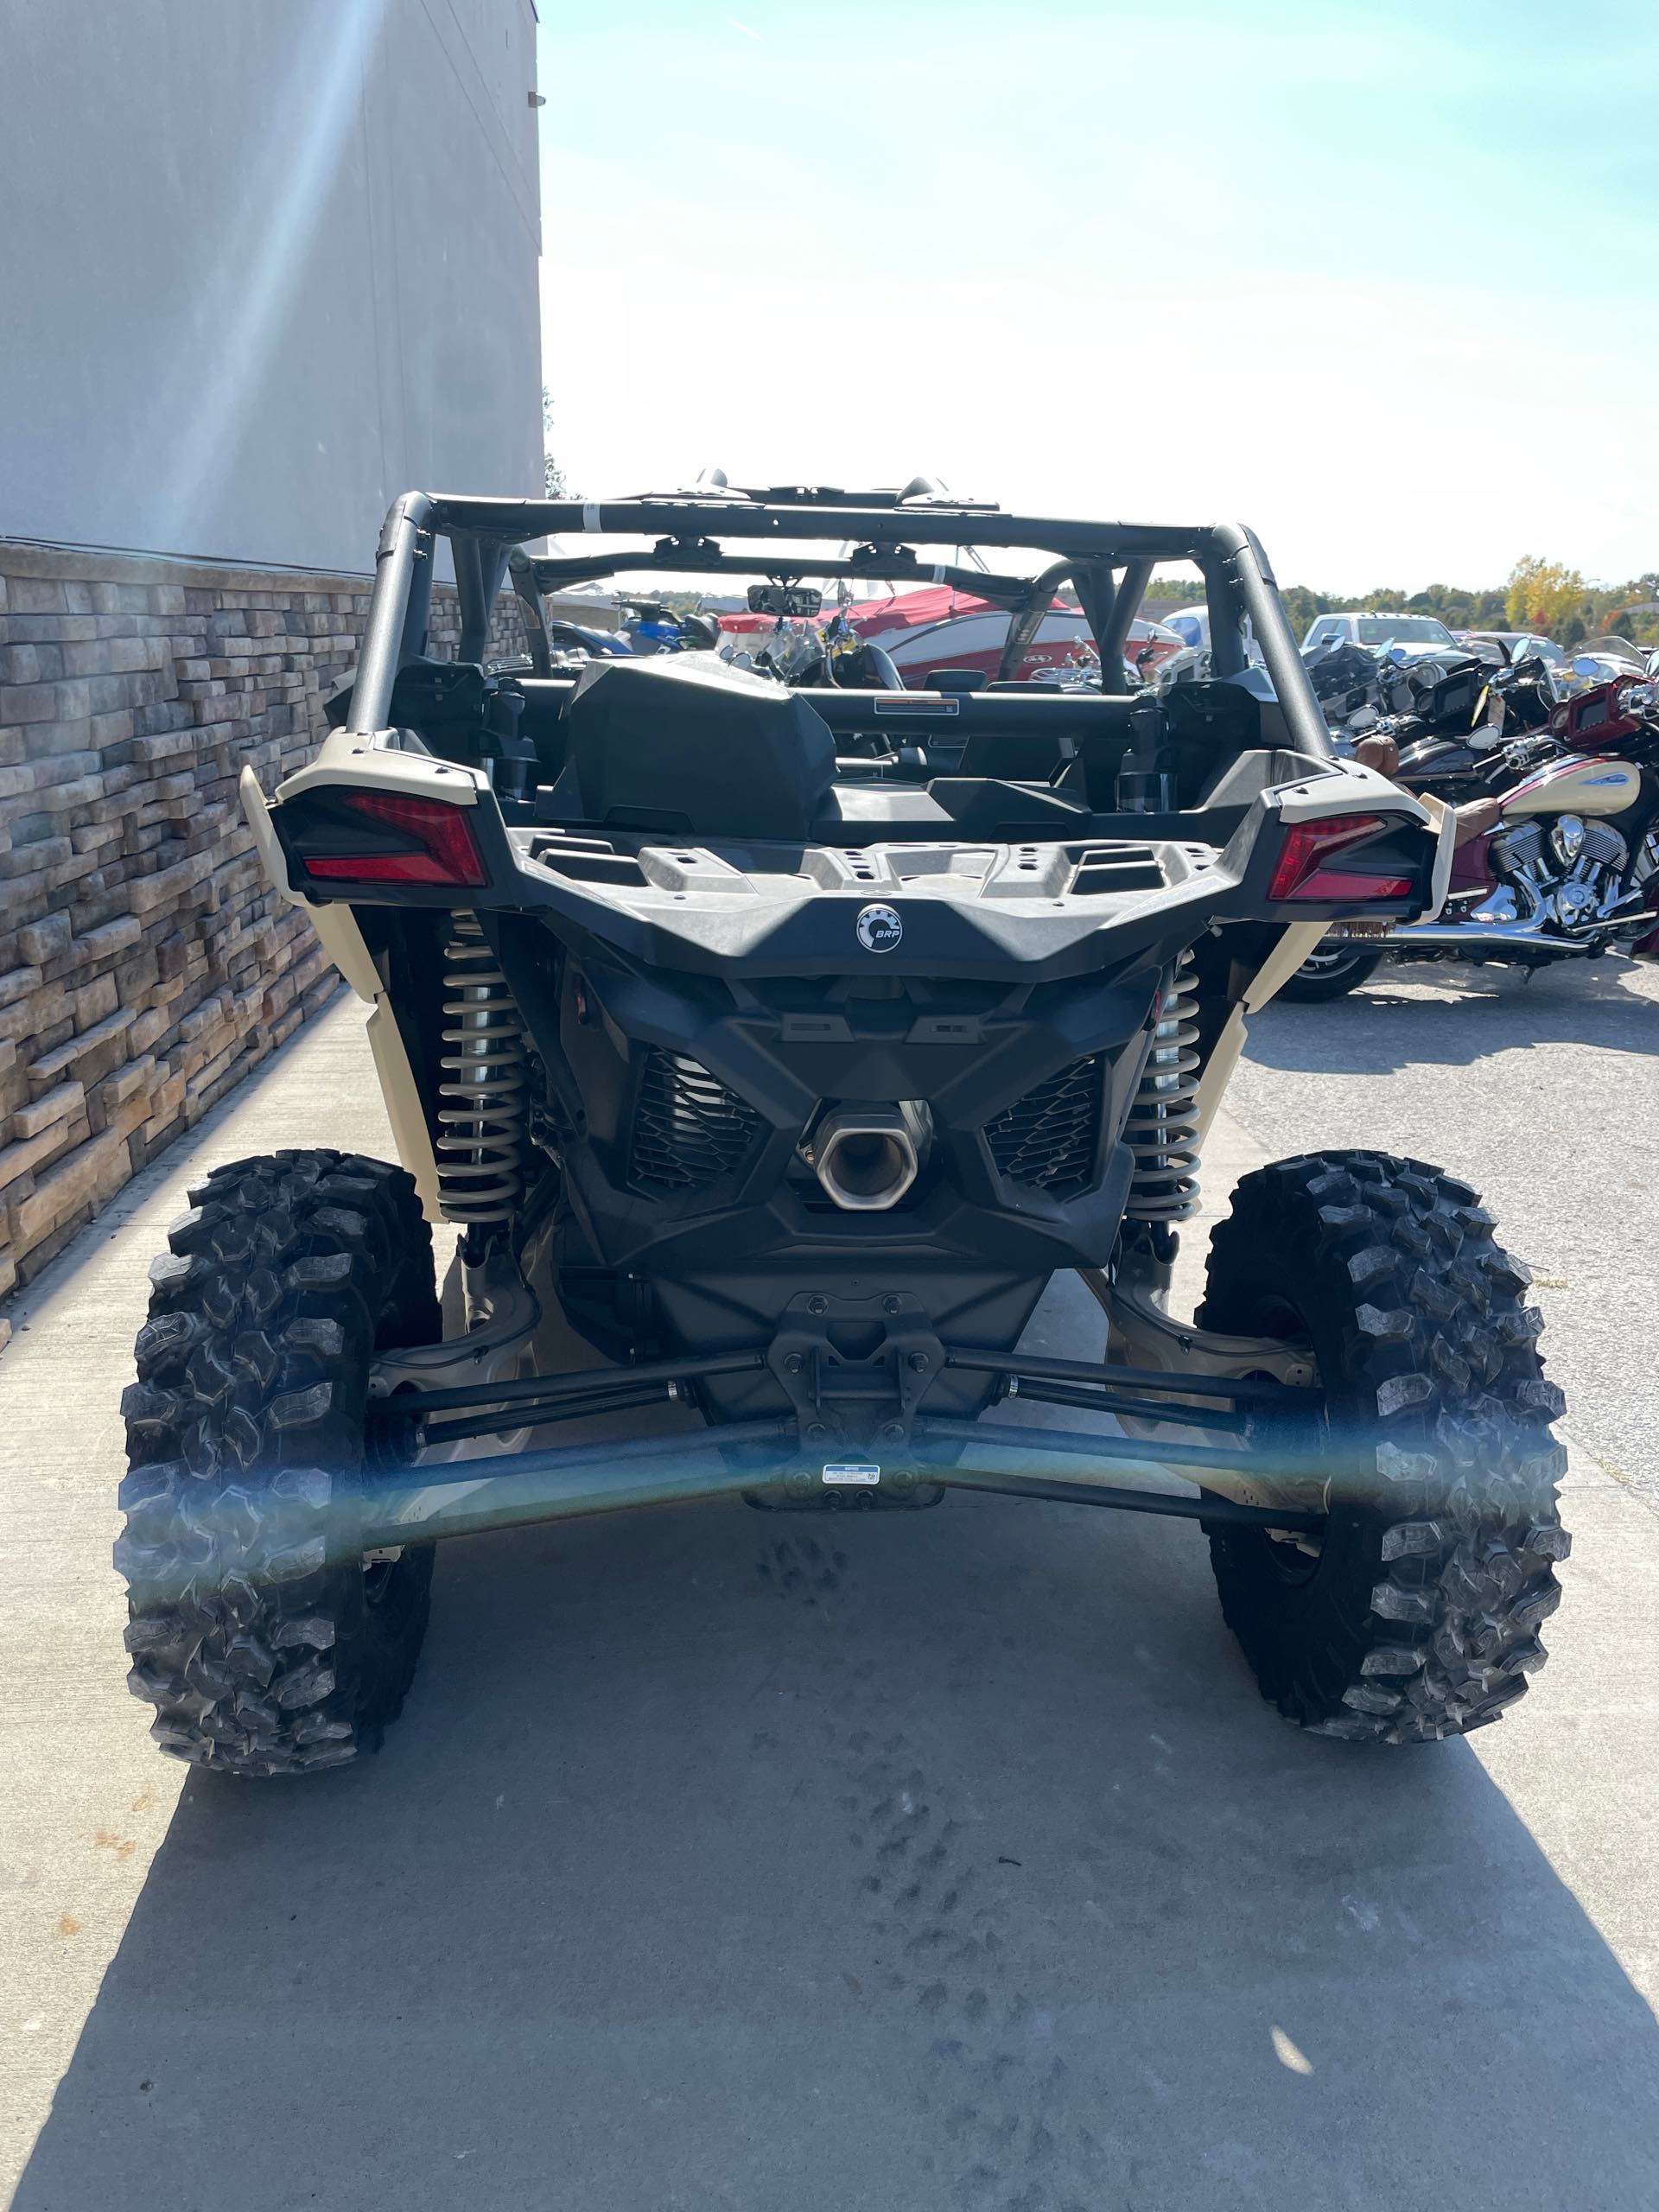 2022 Can-Am Maverick X3 MAX DS TURBO at Head Indian Motorcycle